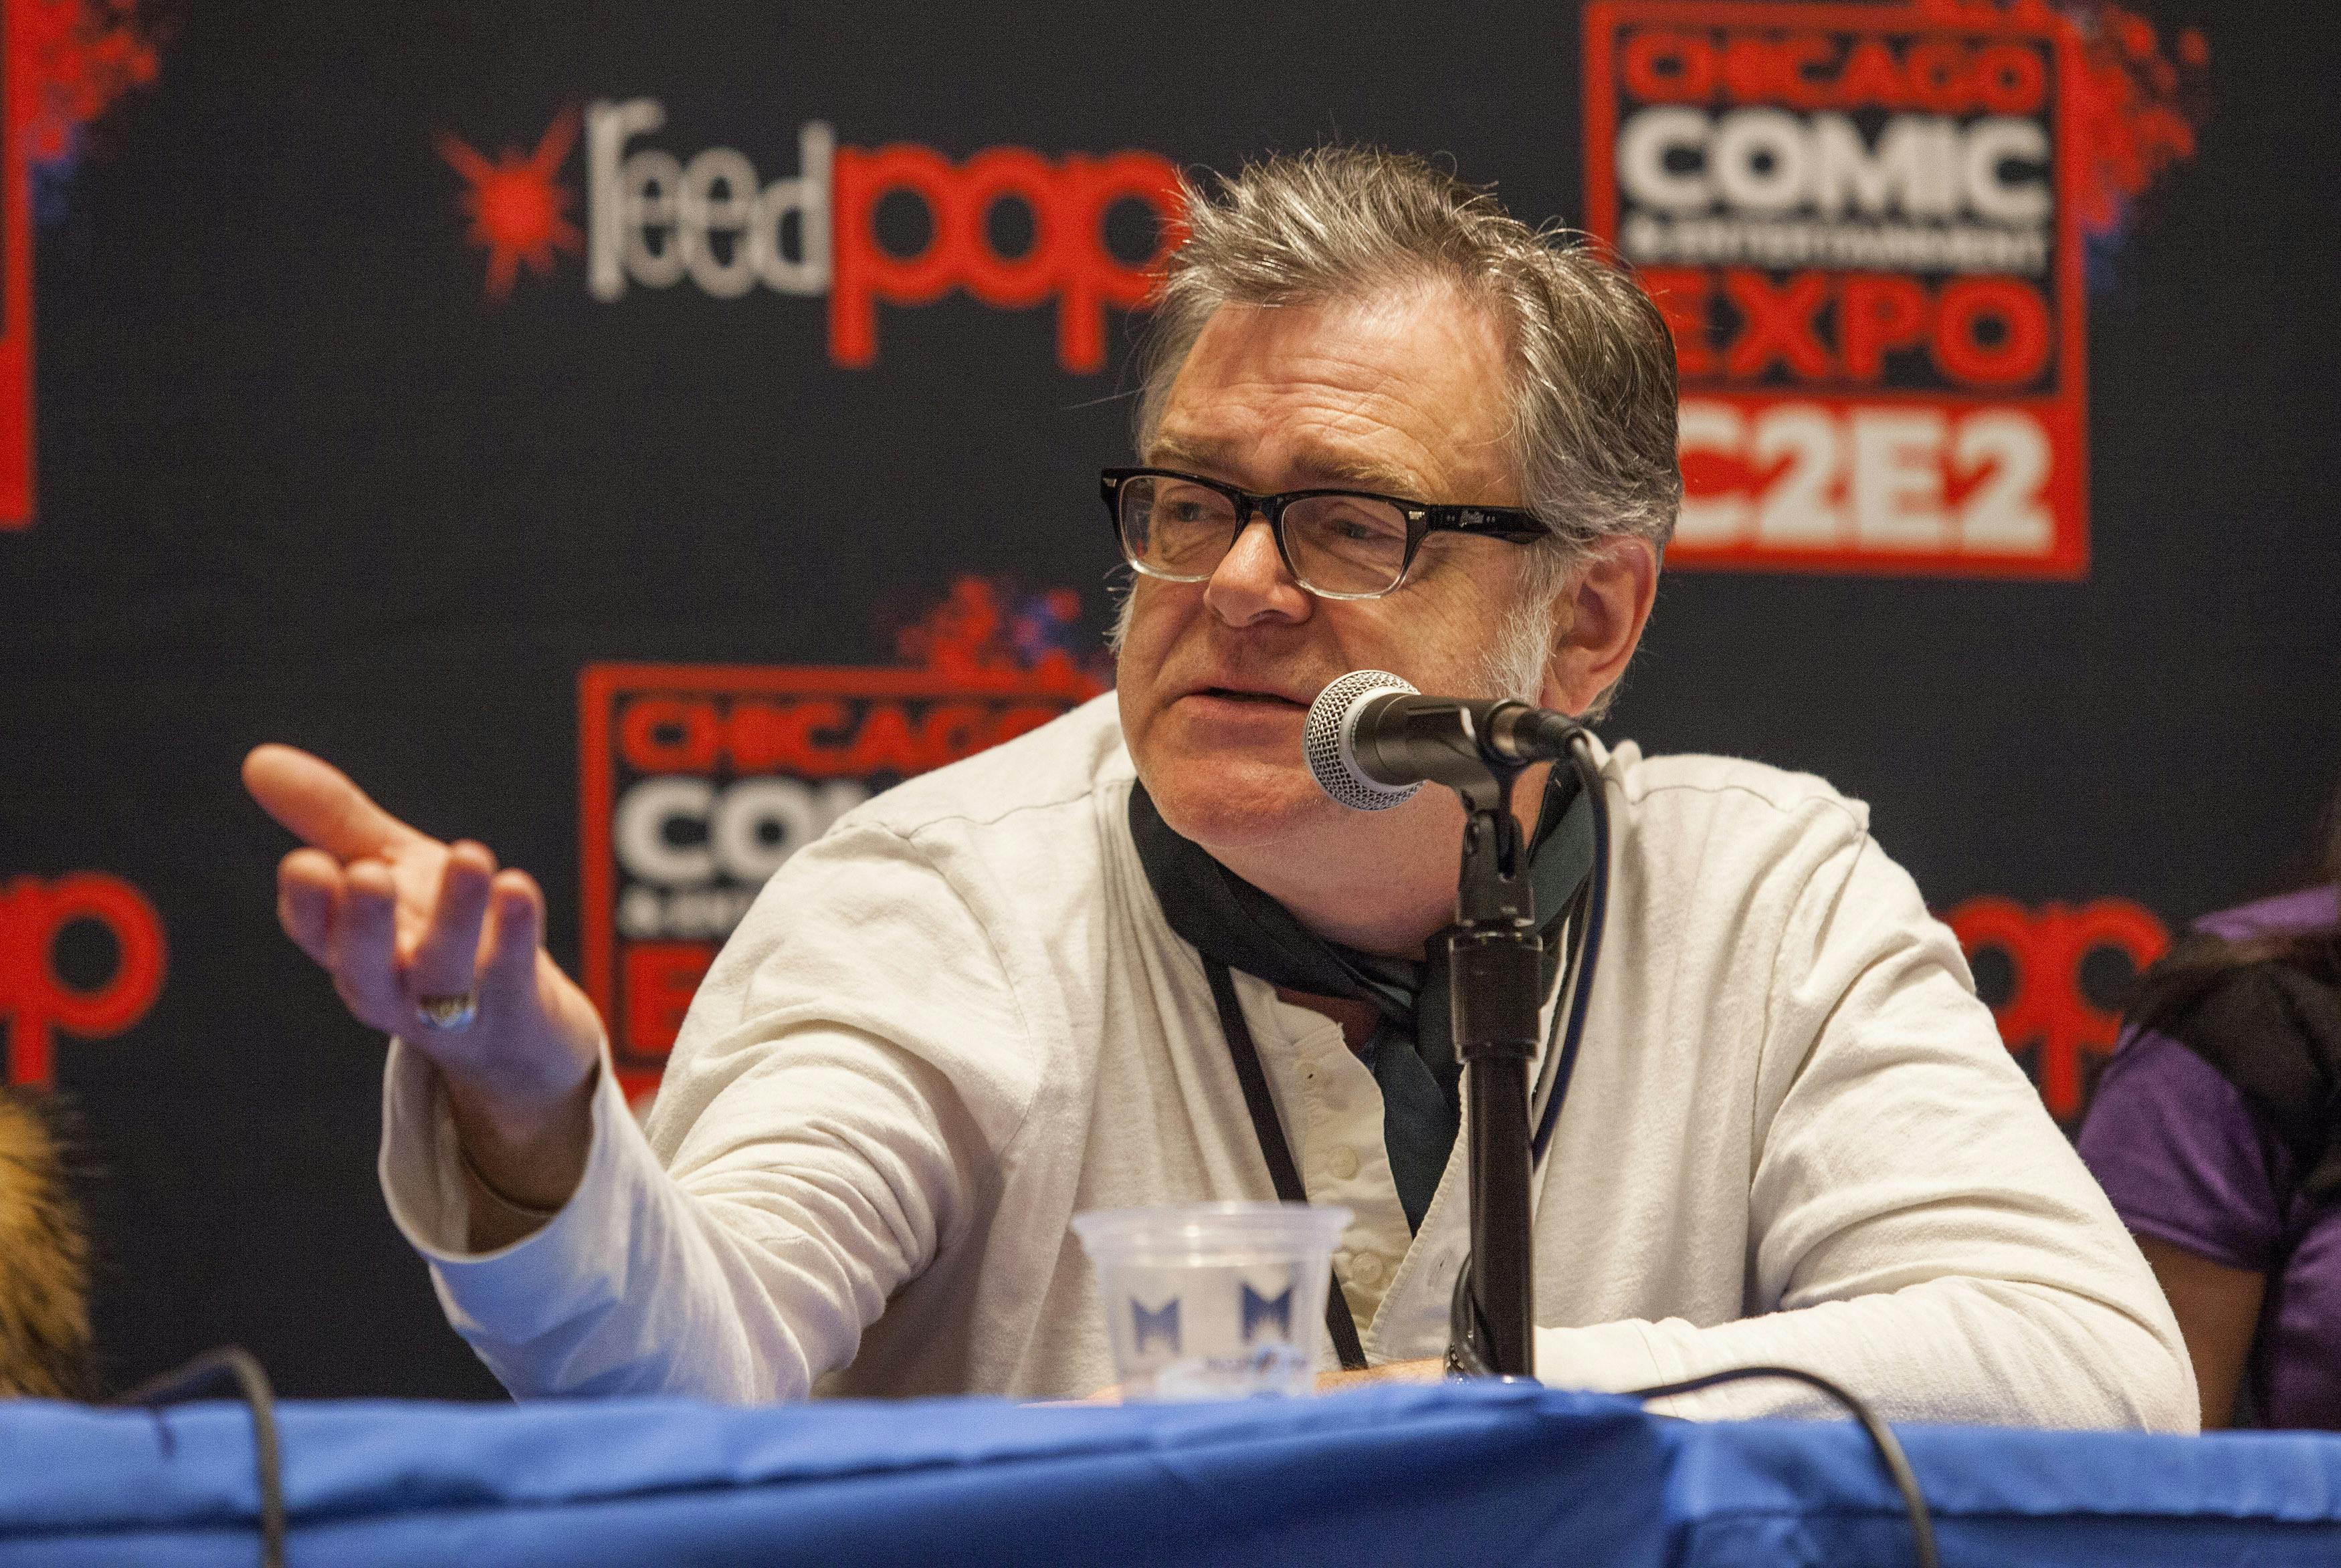 Actor Kevin McNally attends the Pirates of the Caribbean panel at the Chicago Comic & Entertainment Expo at McCormick Place on Sunday, April 28, 2013, in Chicago. (Photo by Barry Brecheisen/Invision/AP)